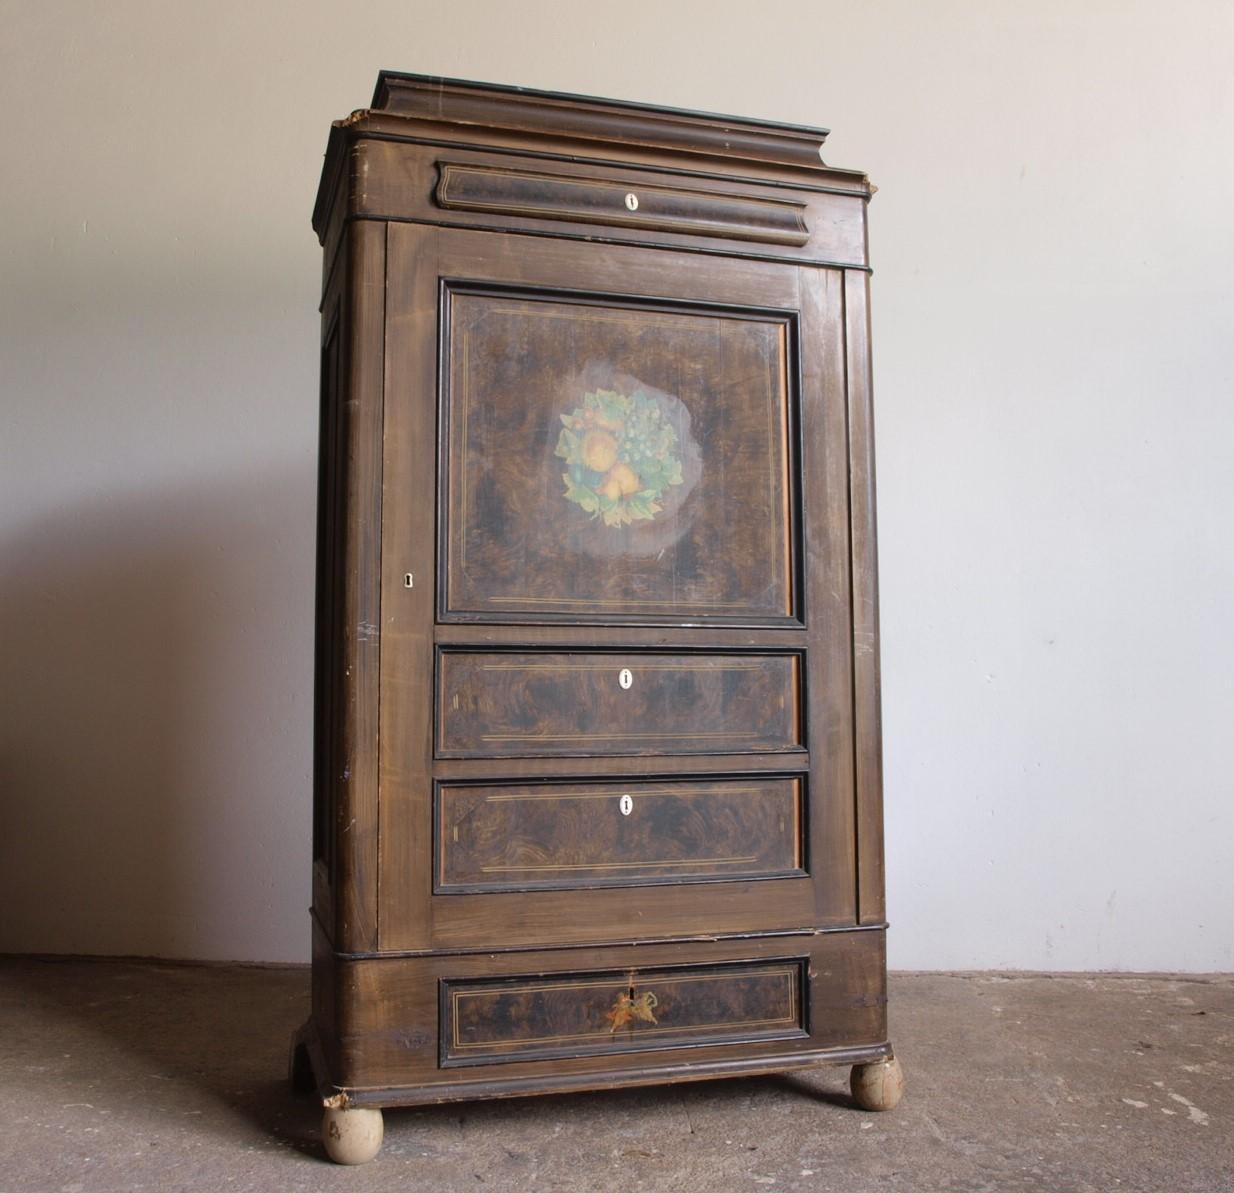 This exquisite antique cabinet, a classic 'karlekammerskab,' hailing from Denmark and dating back to the late 1800s or early 1900s. This remarkable piece boasts the original patina that time has bestowed upon it, a testament to its enduring beauty.